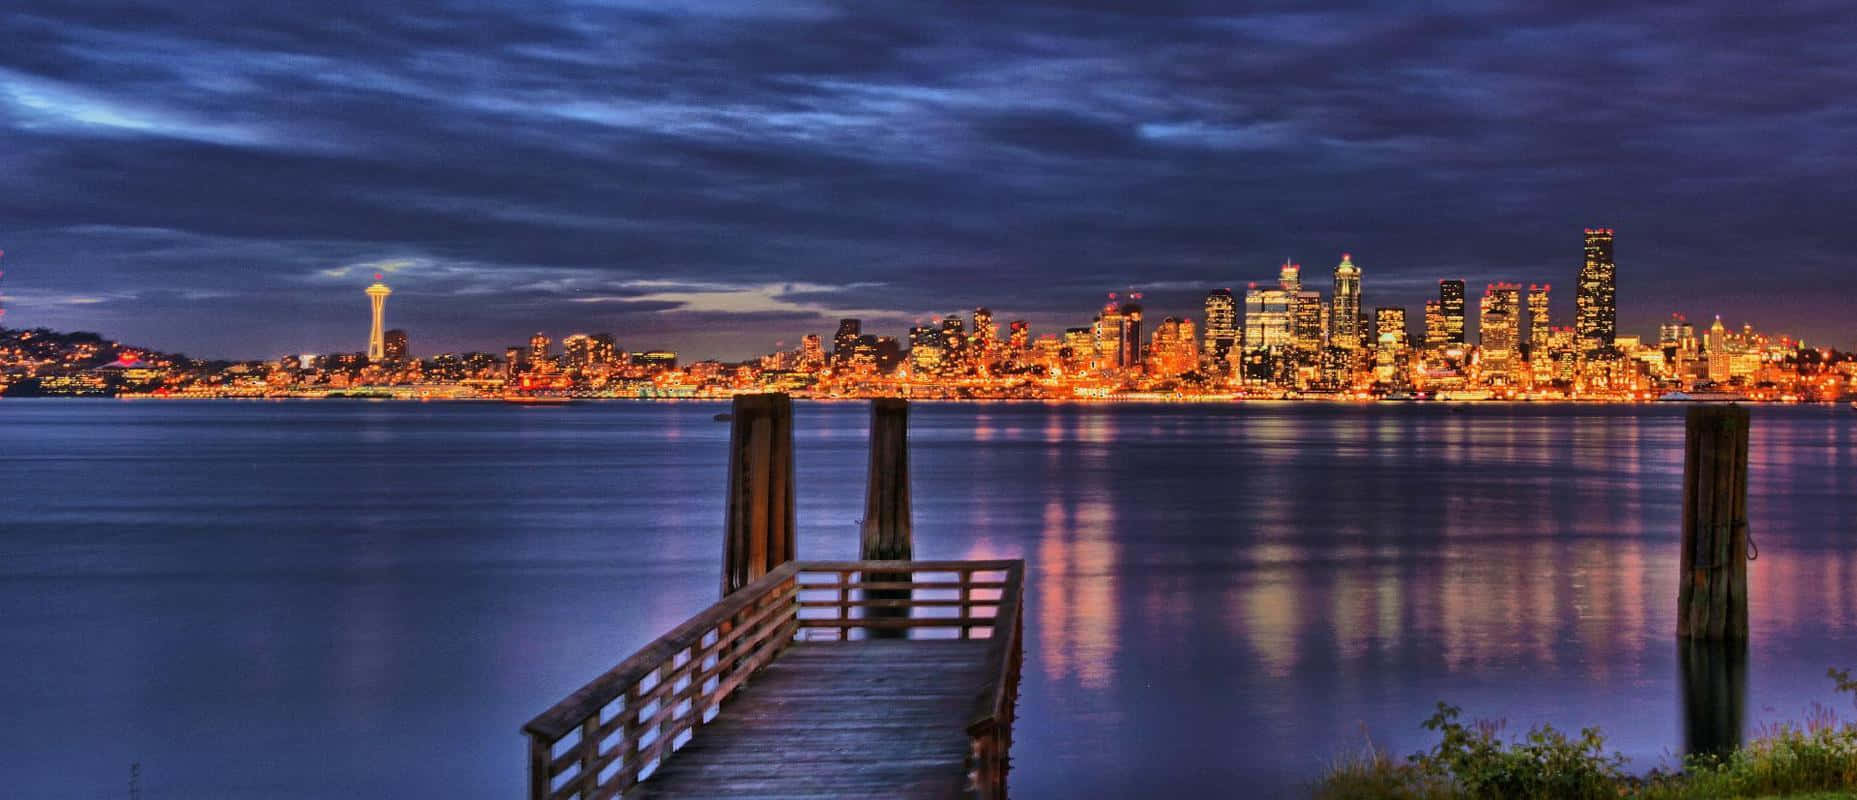 Seattle At Night Wide View Wallpaper